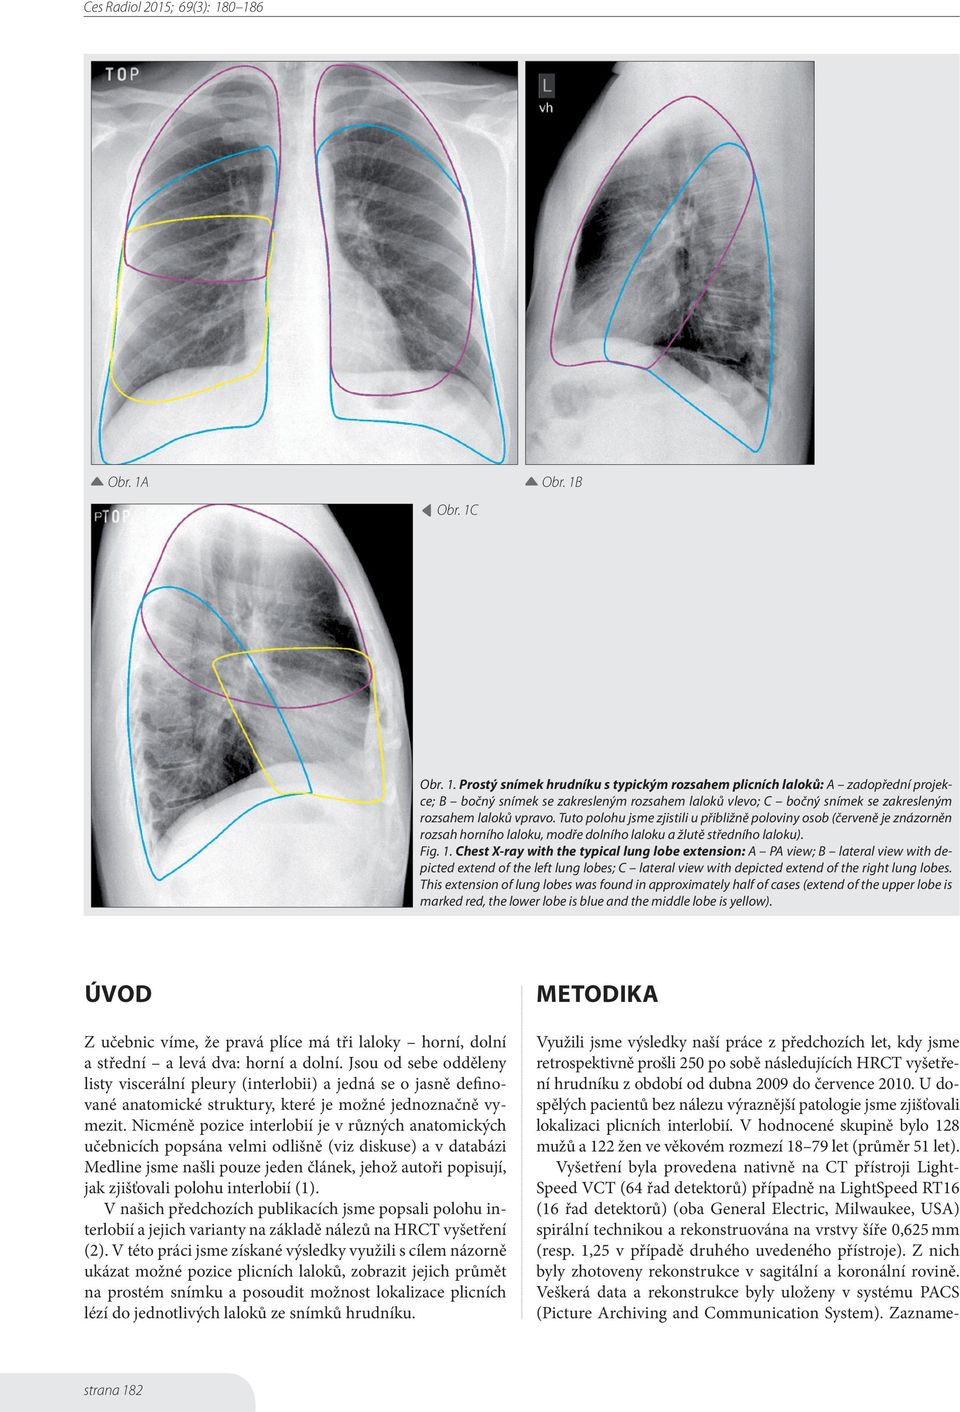 Chest X-ray with the typical lung lobe extension: A PA view; B lateral view with depicted extend of the left lung lobes; C lateral view with depicted extend of the right lung lobes.